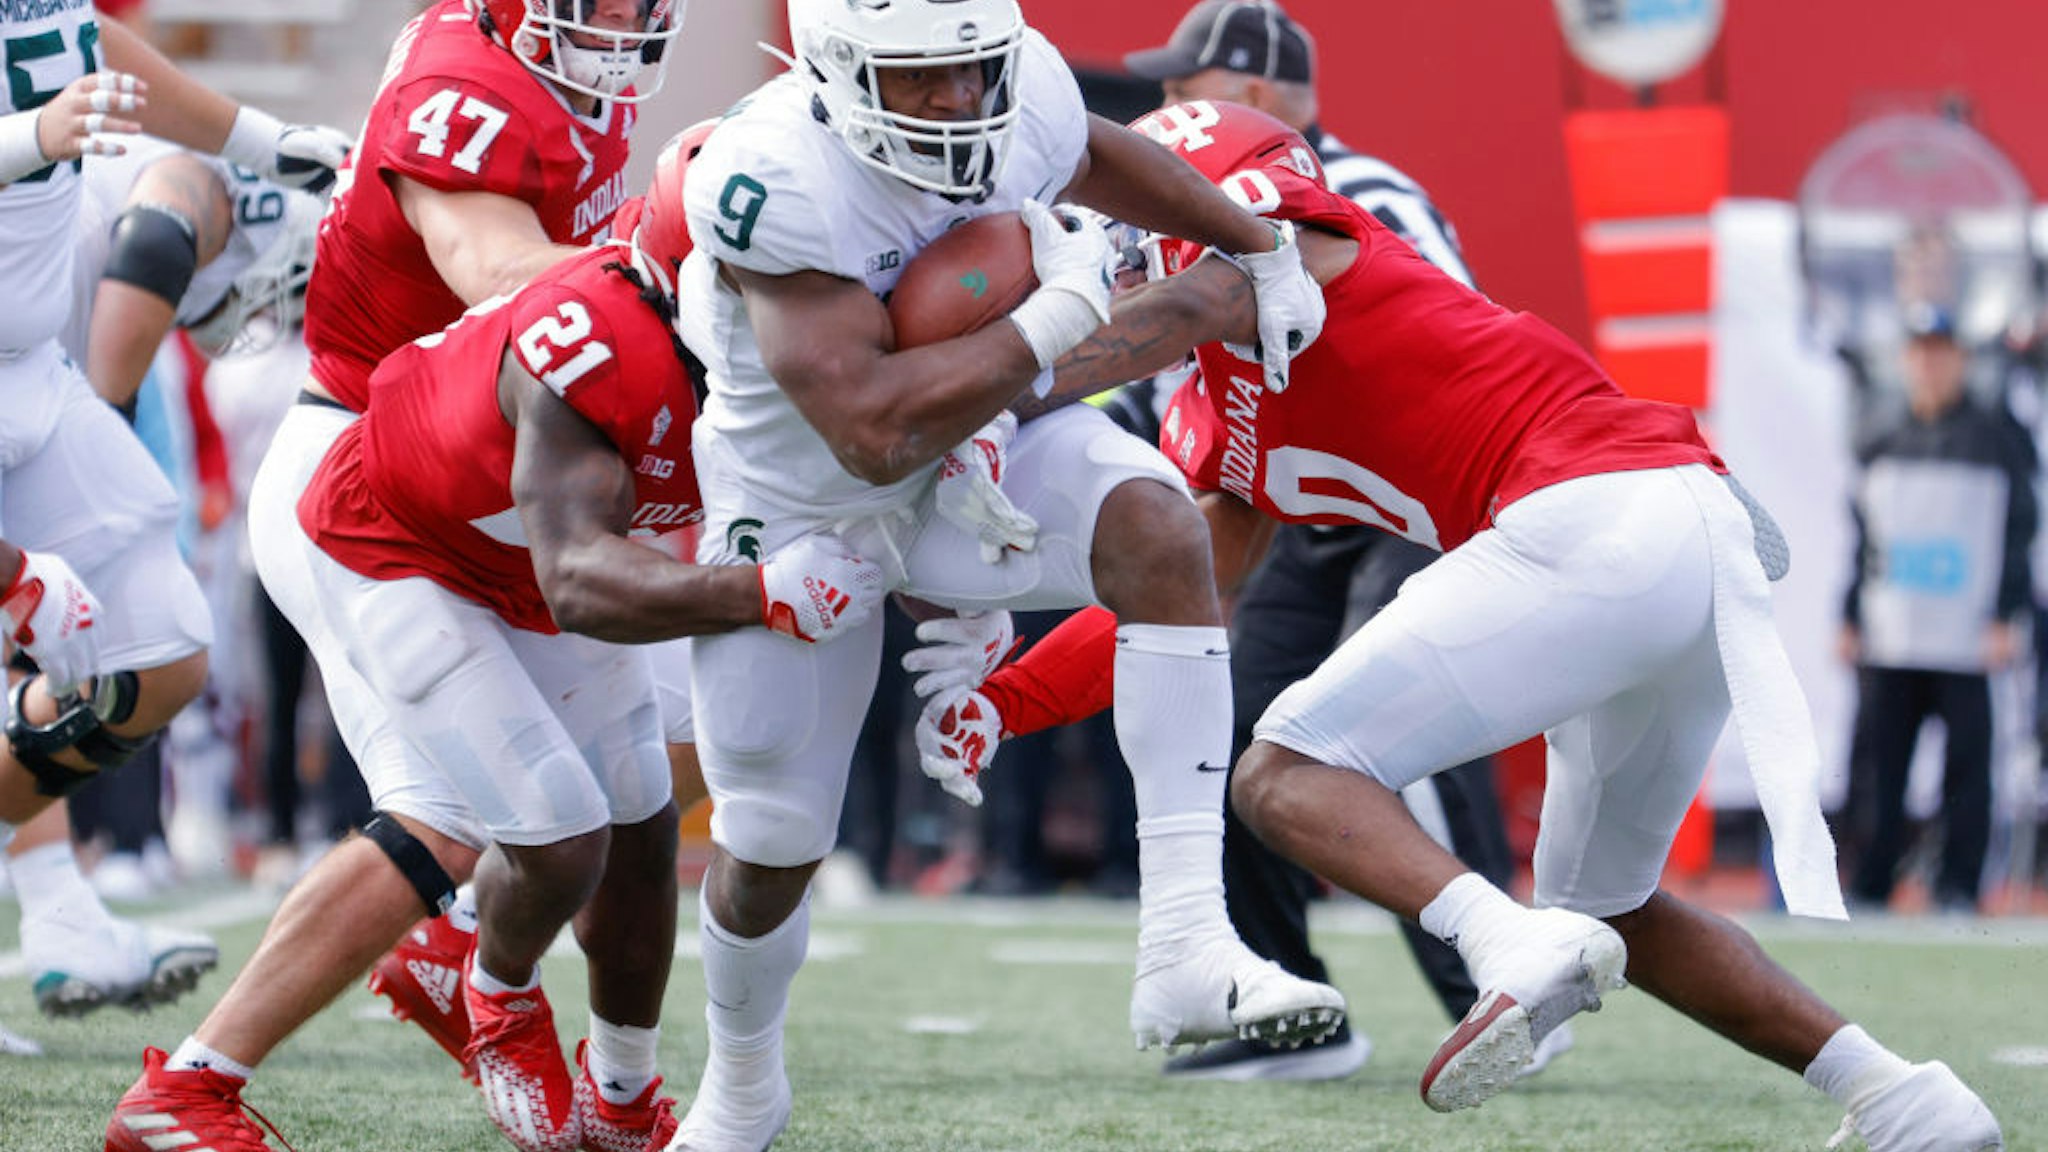 BLOOMINGTON, IN - OCTOBER 16: Kenneth Walker III #9 of the Michigan State Spartans runs the ball during the game against the Indiana Hoosiers at Indiana University on October 16, 2021 in Bloomington, Indiana. (Photo by Michael Hickey/Getty Images)